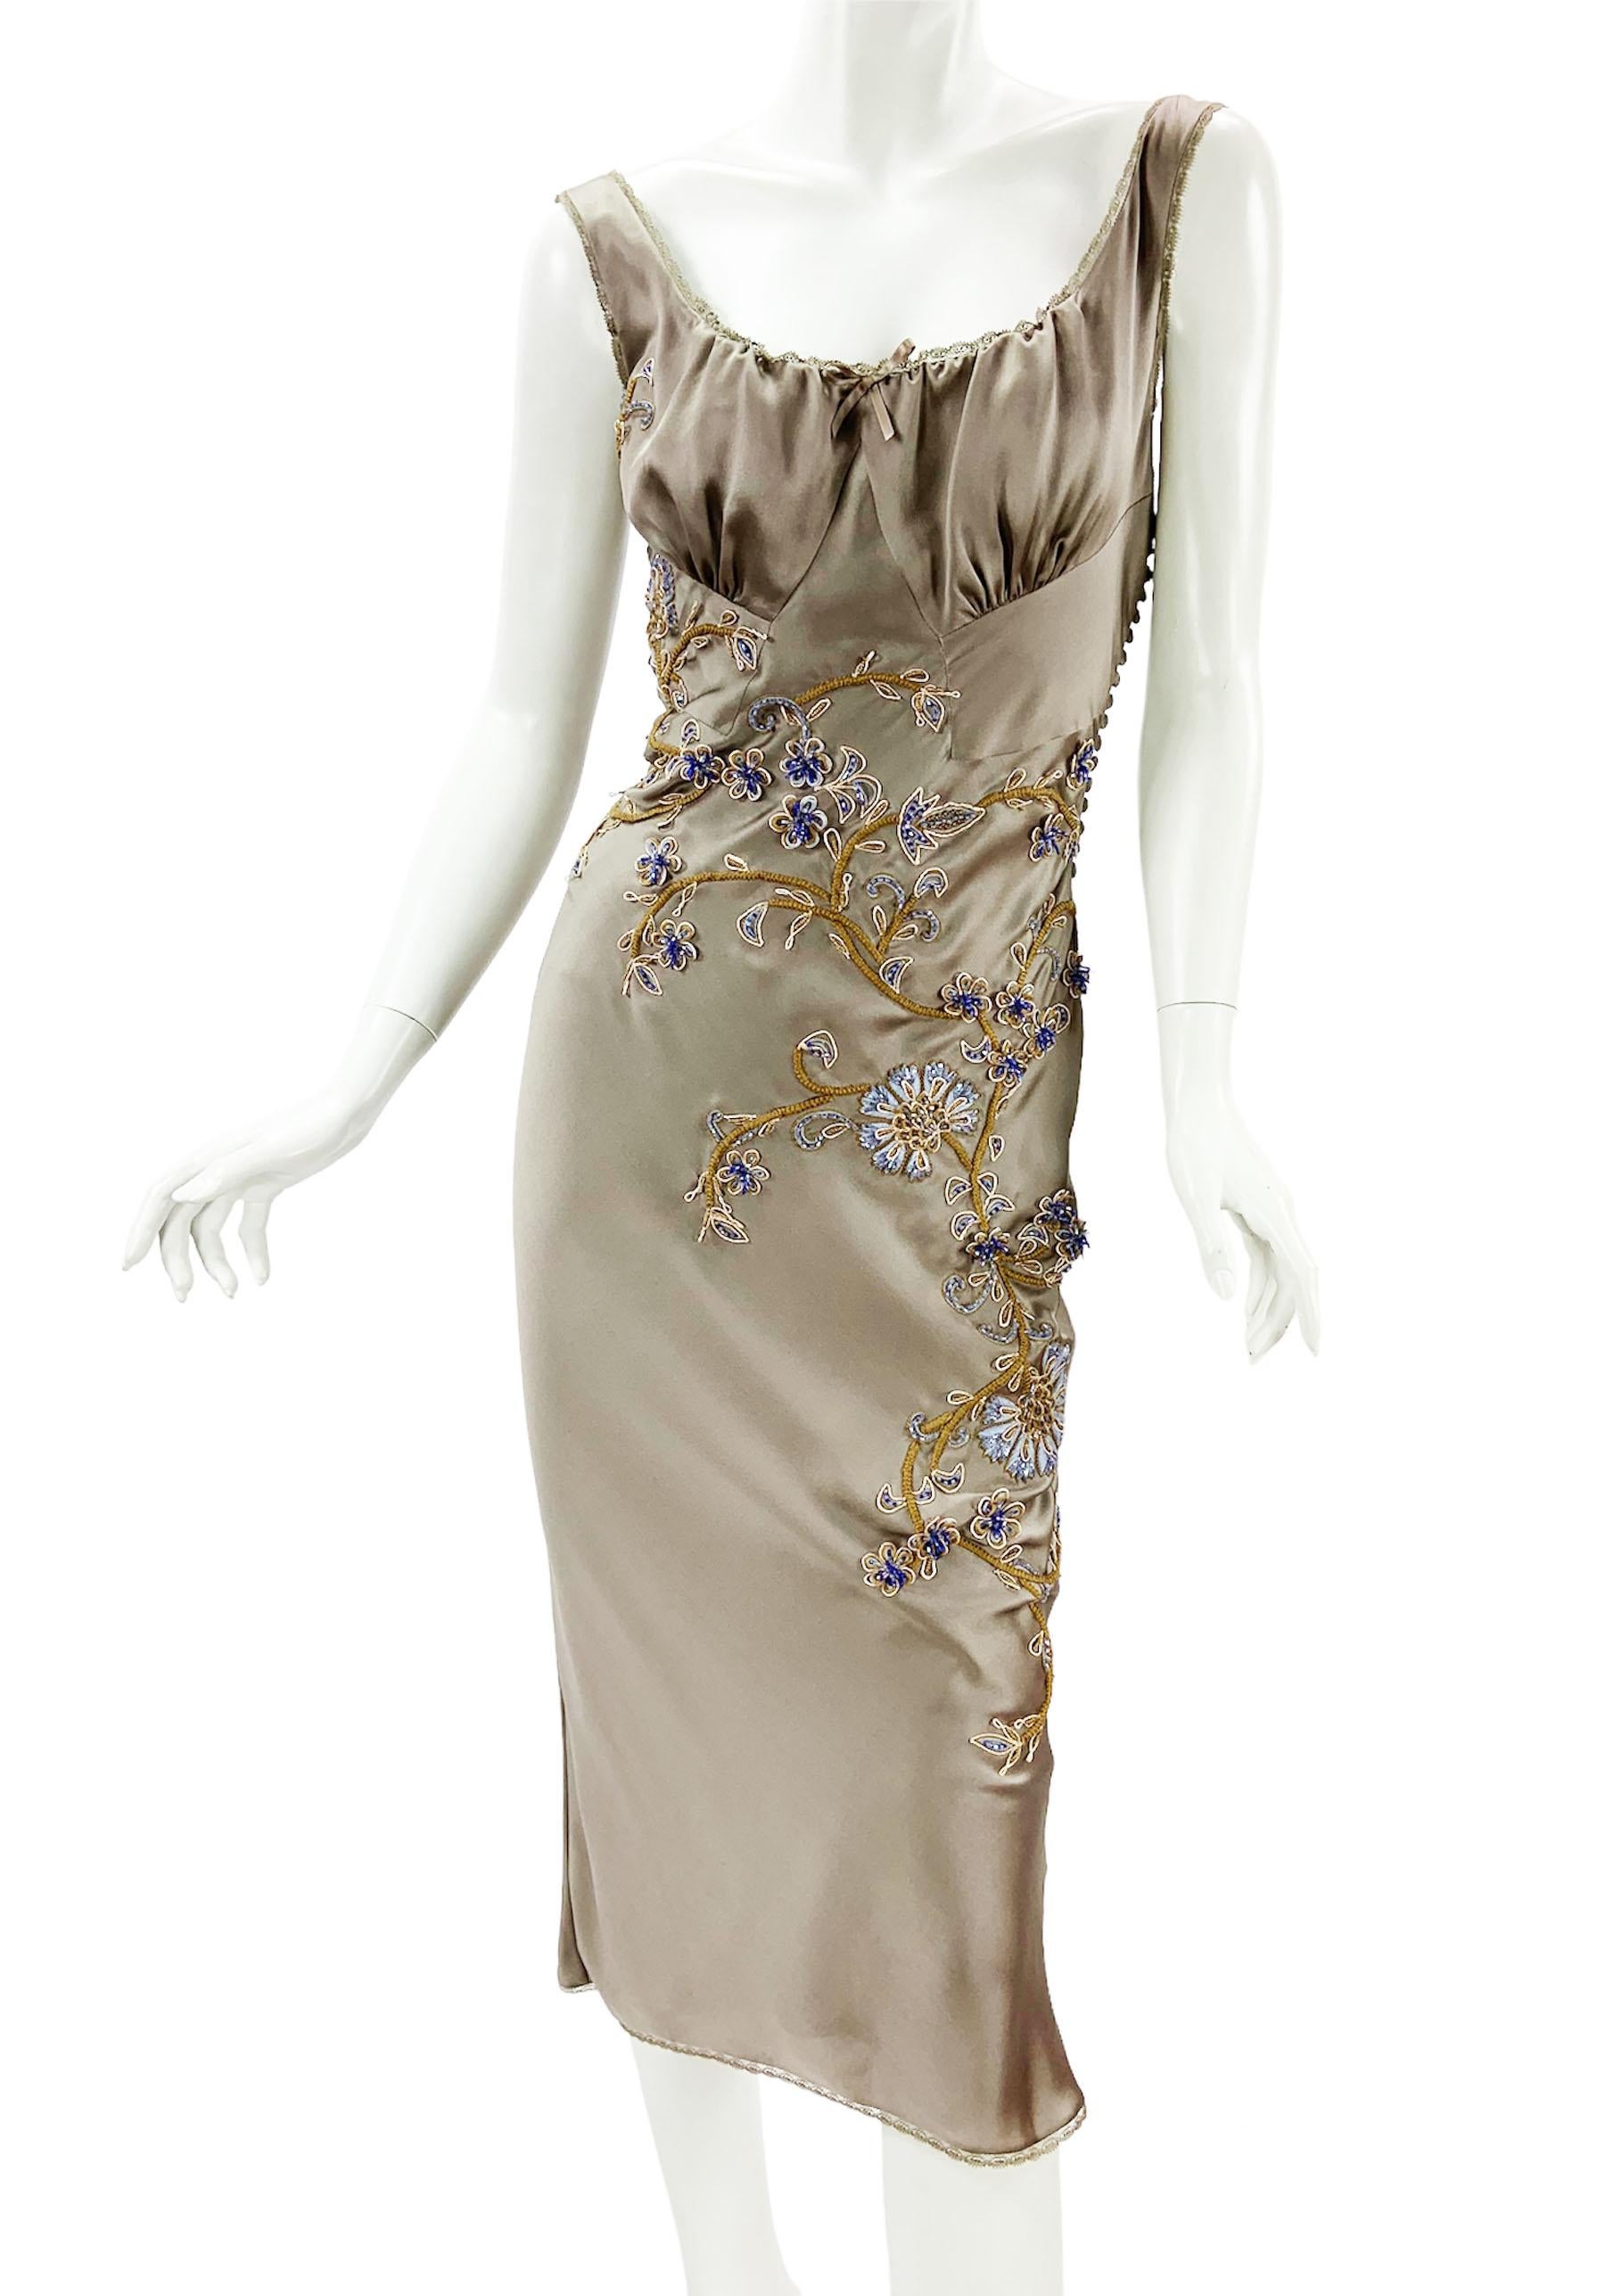 Christian Dior by John Galliano Silk Nude Embroidered Cocktail Dress
French size 38 ( US 6 )
S/S 2006 Collection
Christian Dior transports fashion to a romantic era with this draped dress.
100% silk, Delicate floral embroidery and beads, Signature